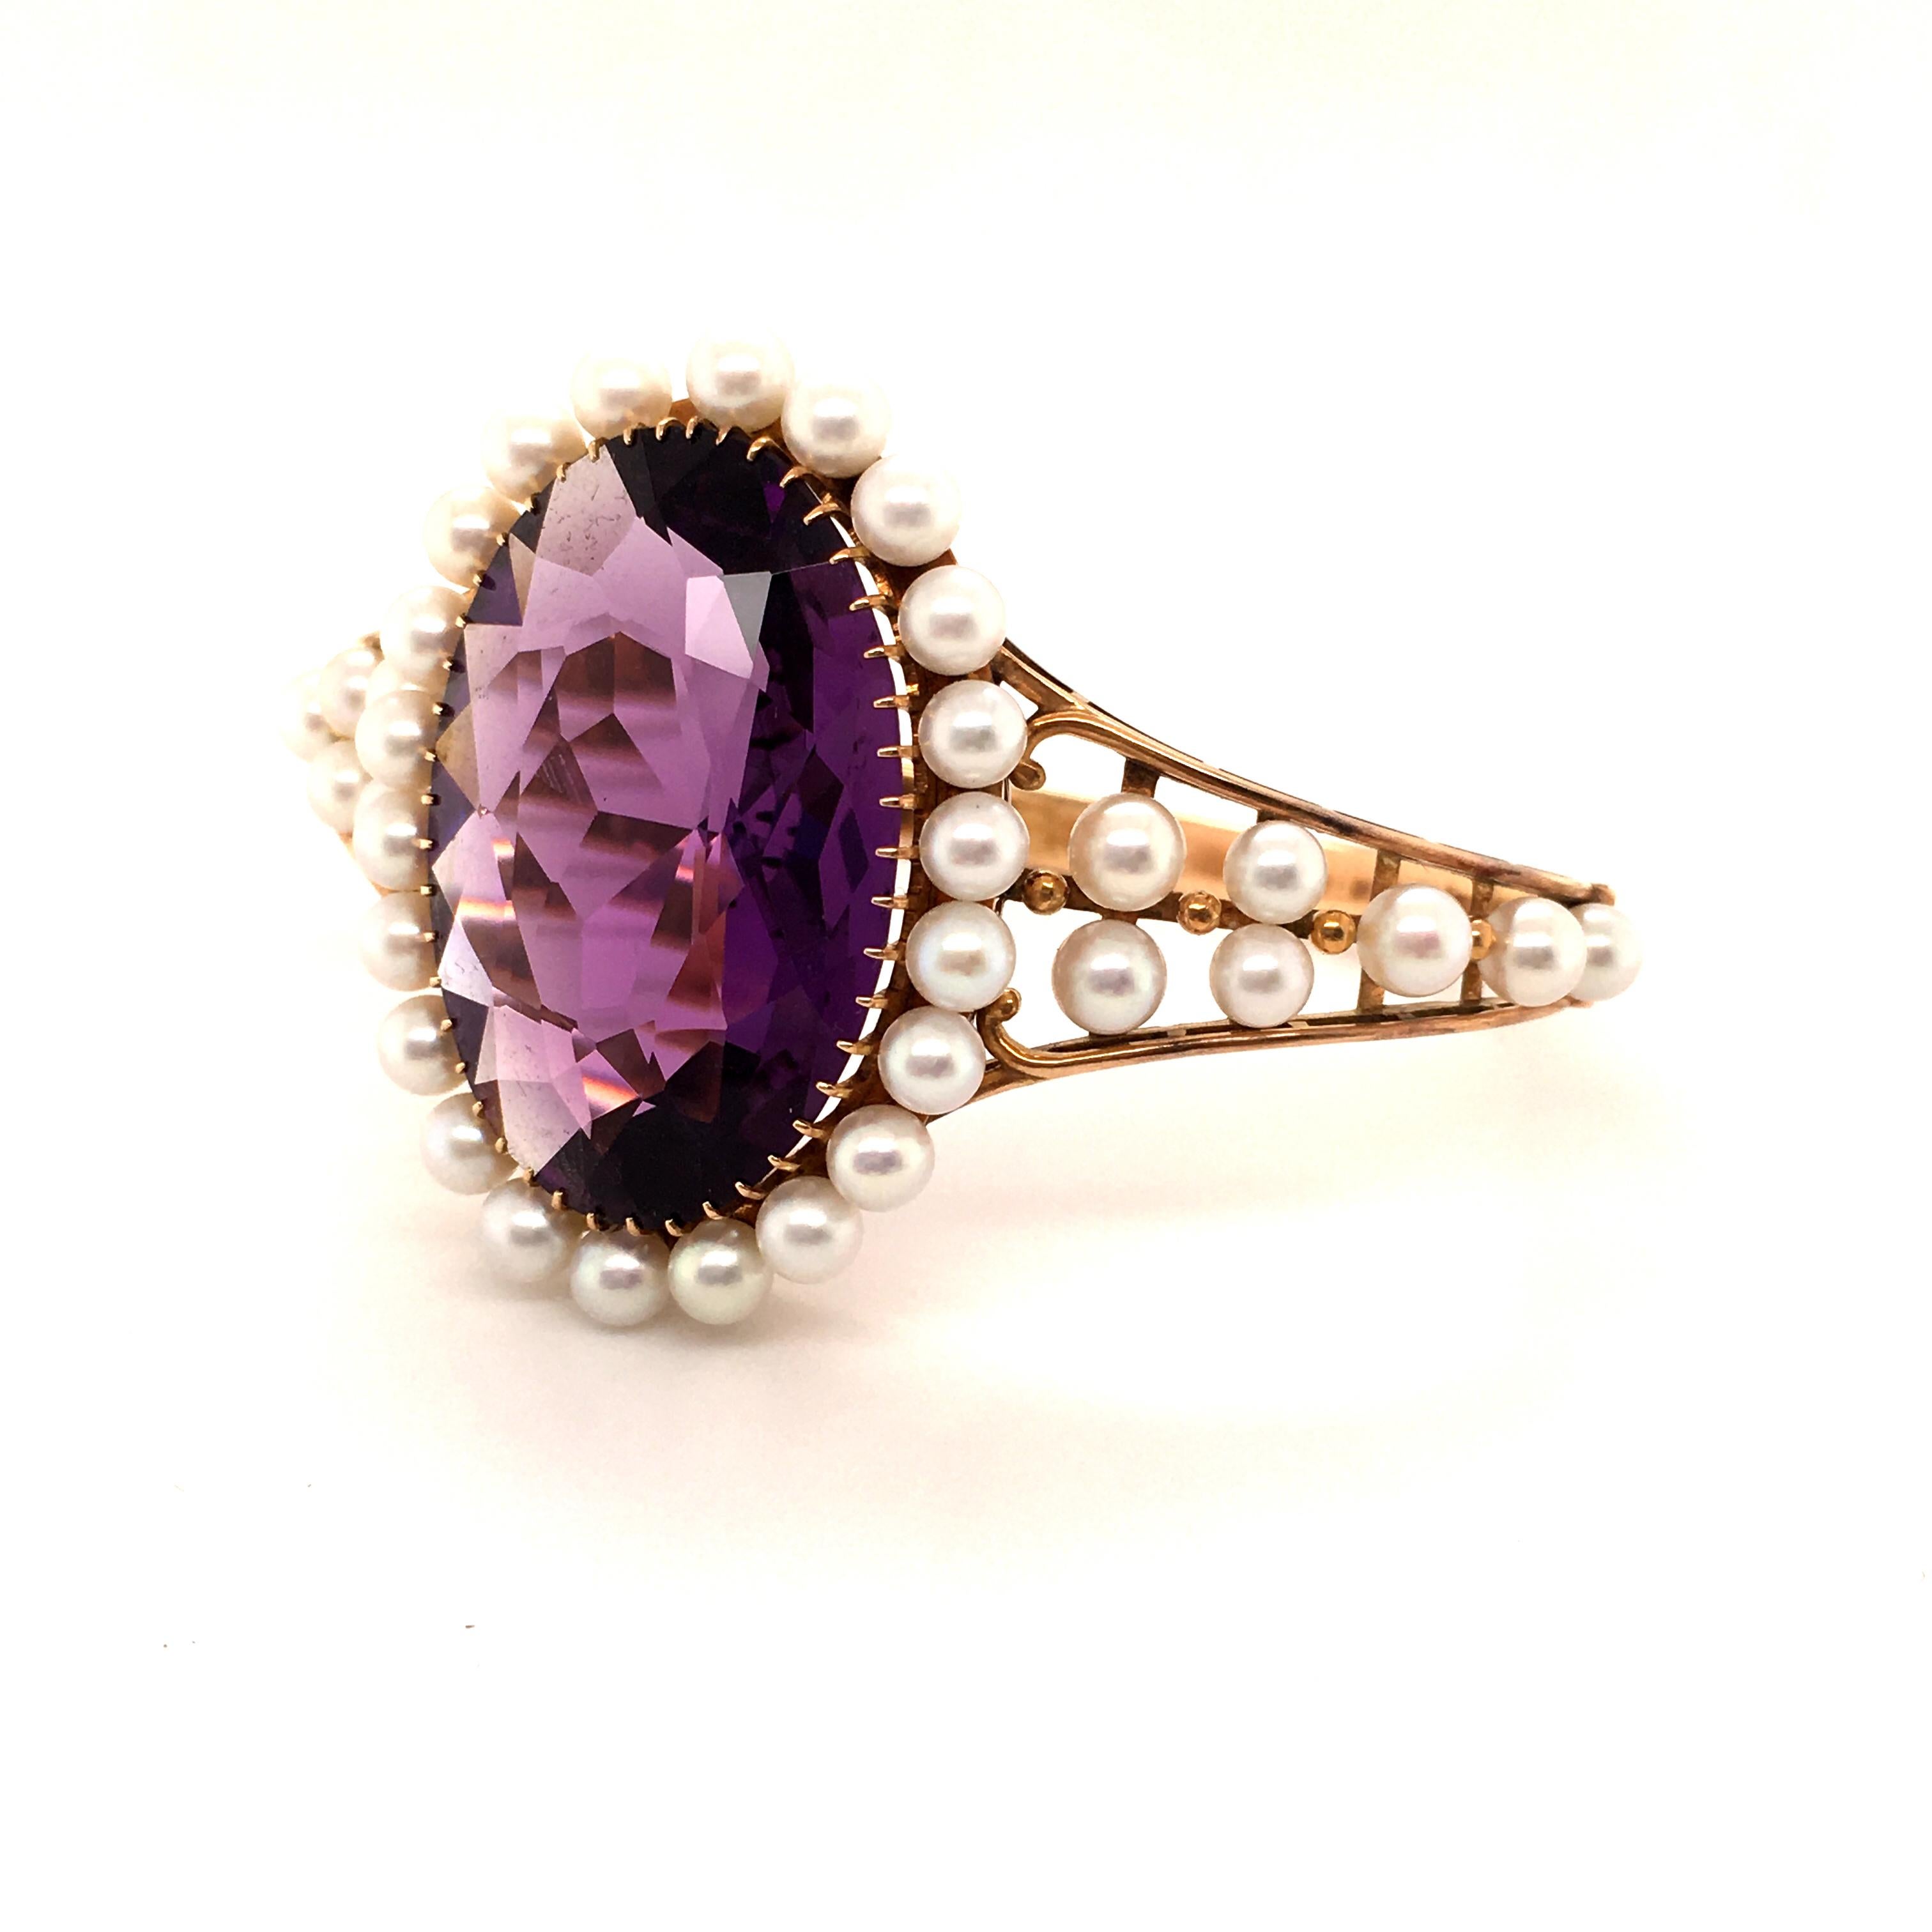 Center of attraction of this 1940s open work bangle is a 45 ct oval shaped, eye clean amethyst. The stone has a pleasant bluish-violet hue, not too oversaturated that allows the stone to show a lot of life. Ornamented with an entourage of Japanese